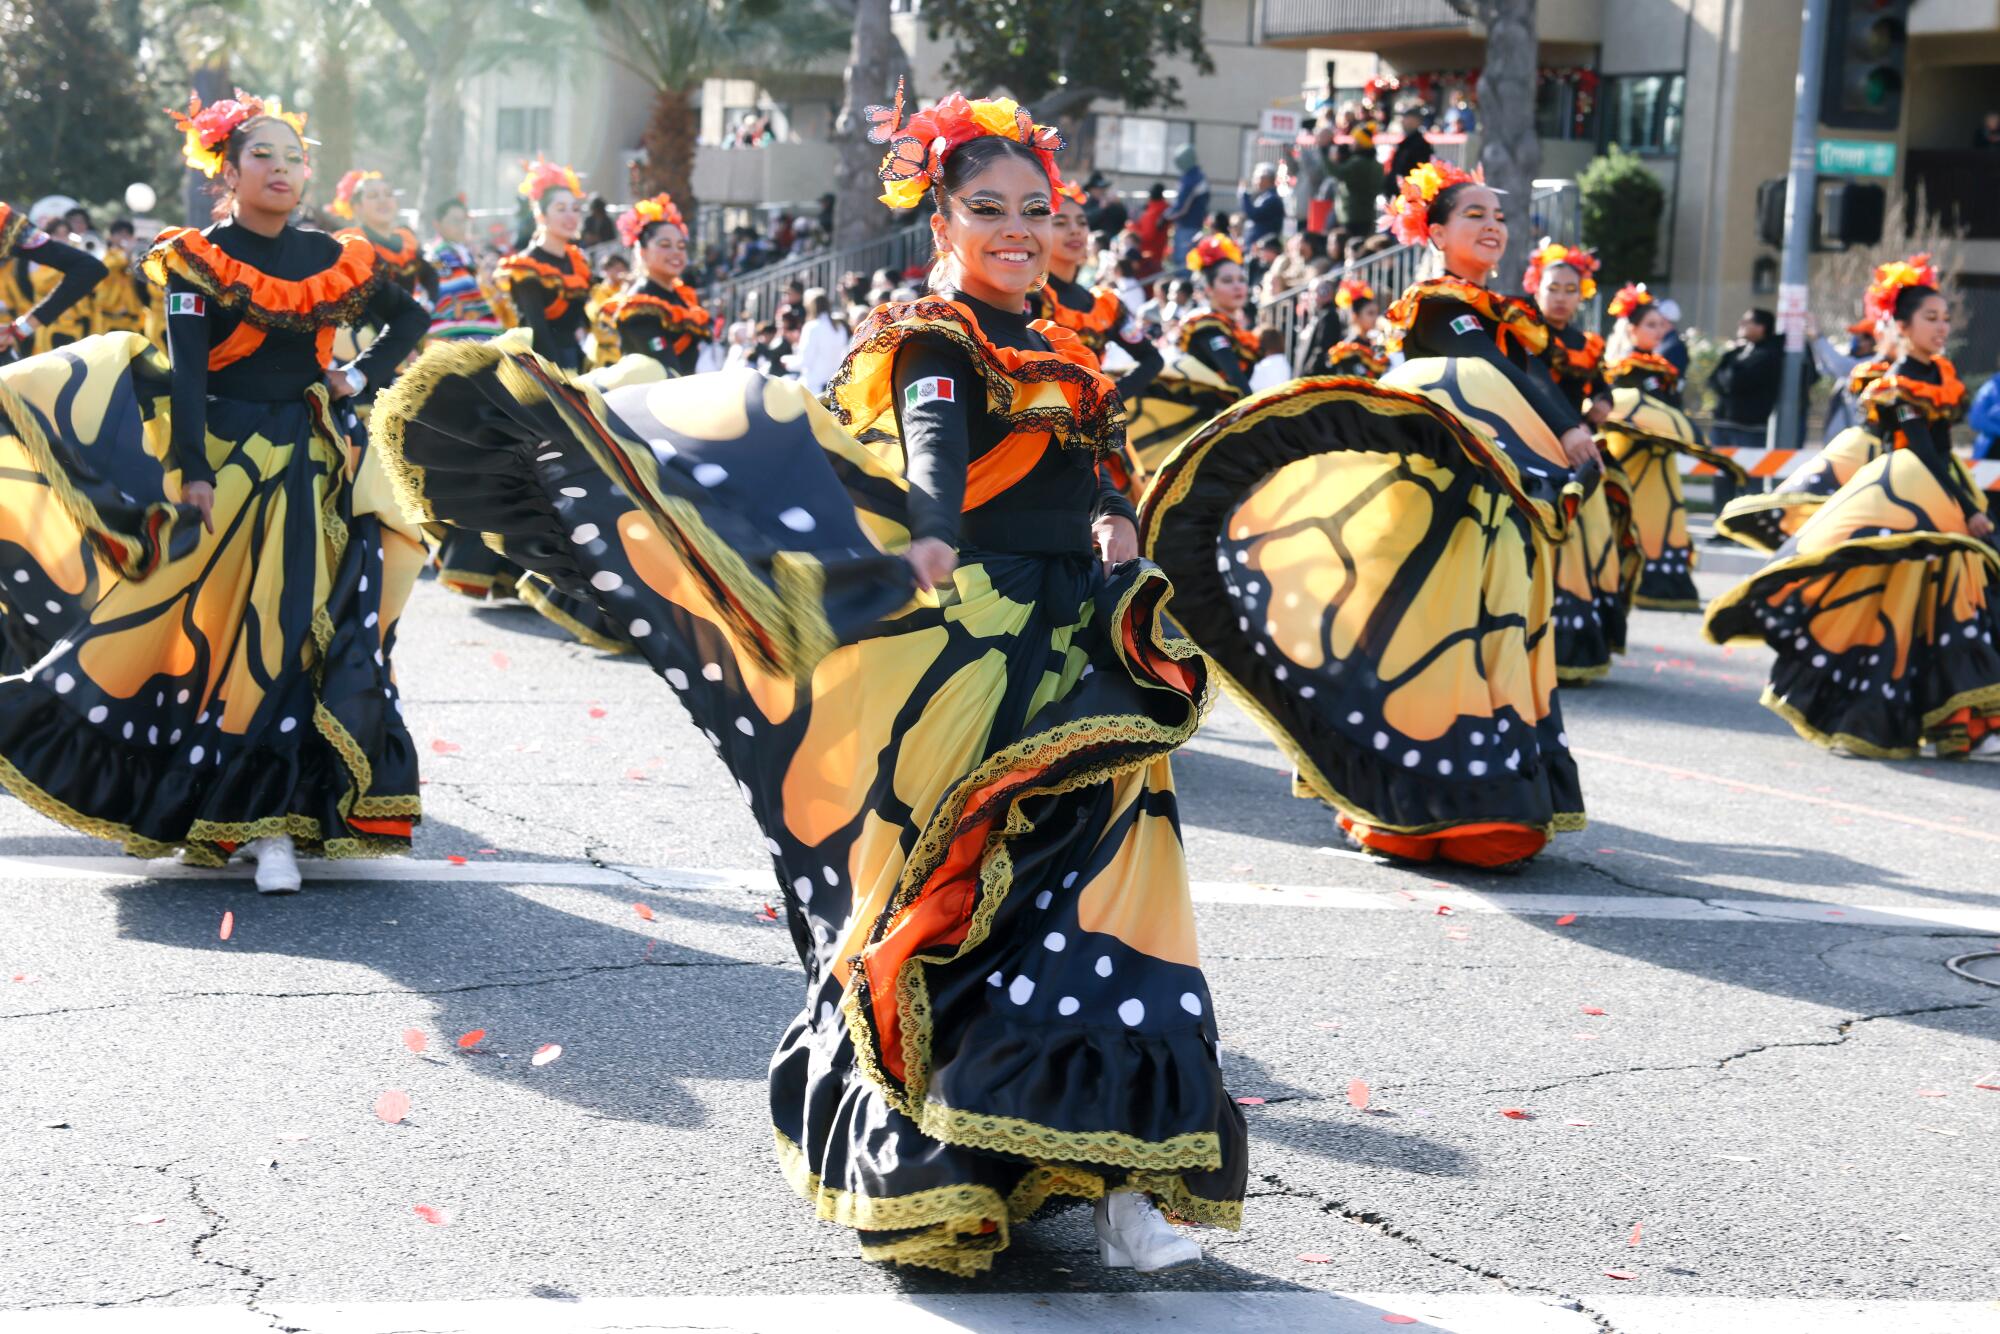 Dancers in gowns patterned after monarch butterflies